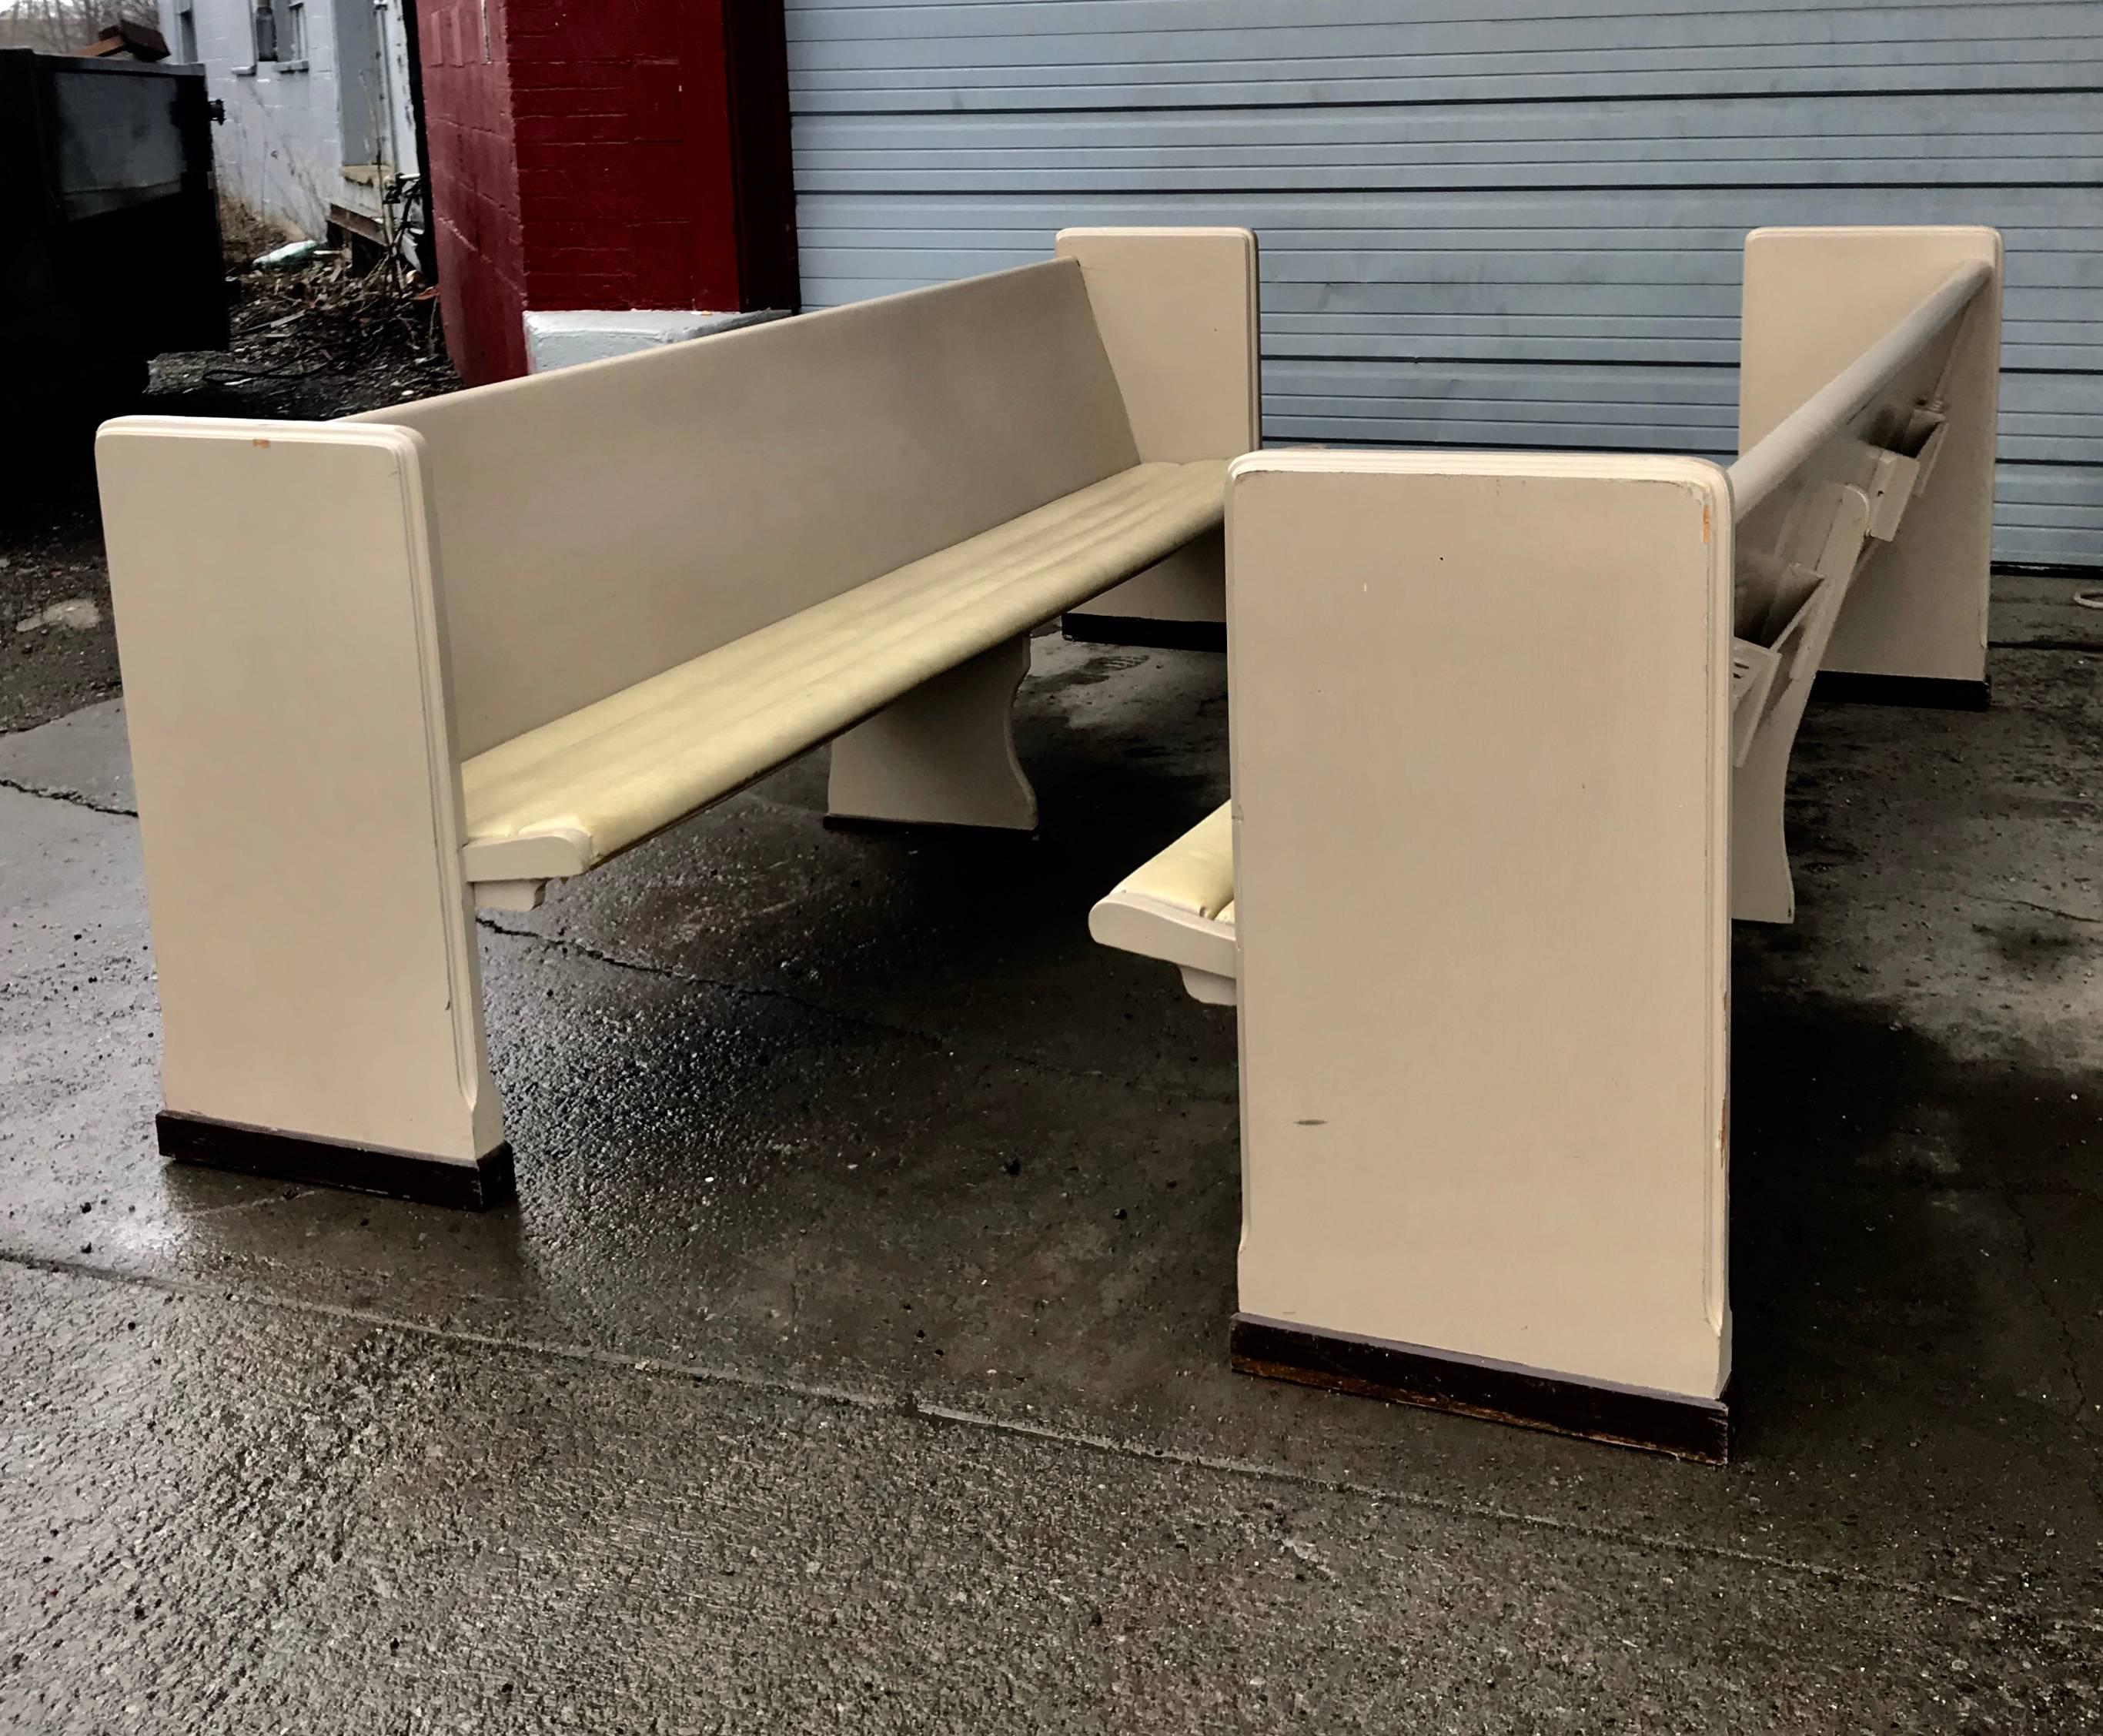 Modernist 9' painted tufted seat church pews or benches. Heavy painted oak, amazing sleek, simple elegant design. Hand delivery avail to New York City or anywhere en route from Buffalo New York.